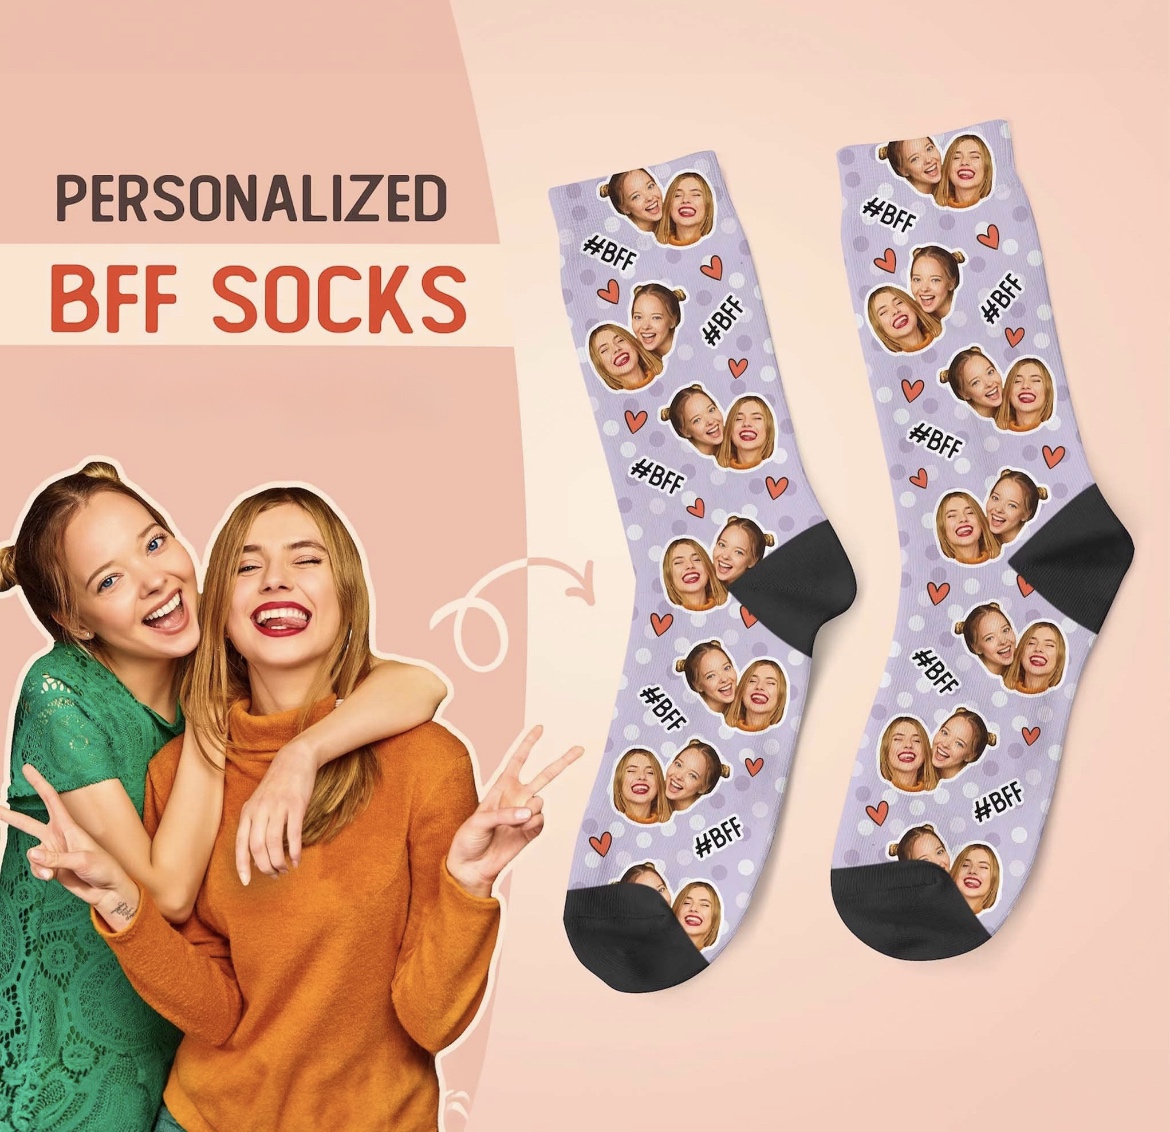 customized bff socks, personalized face socks on etsy. Best friend gifts. Gift ideas for best friend. BFF gift ideas. Bestie gift ideas. Gift Ideas for a special friend. Gift ideas for sister. Gift ideas for female best friends. Presents for best friend. Unique best friend gifts. Meaningful gift ideas. Thoughtful presents